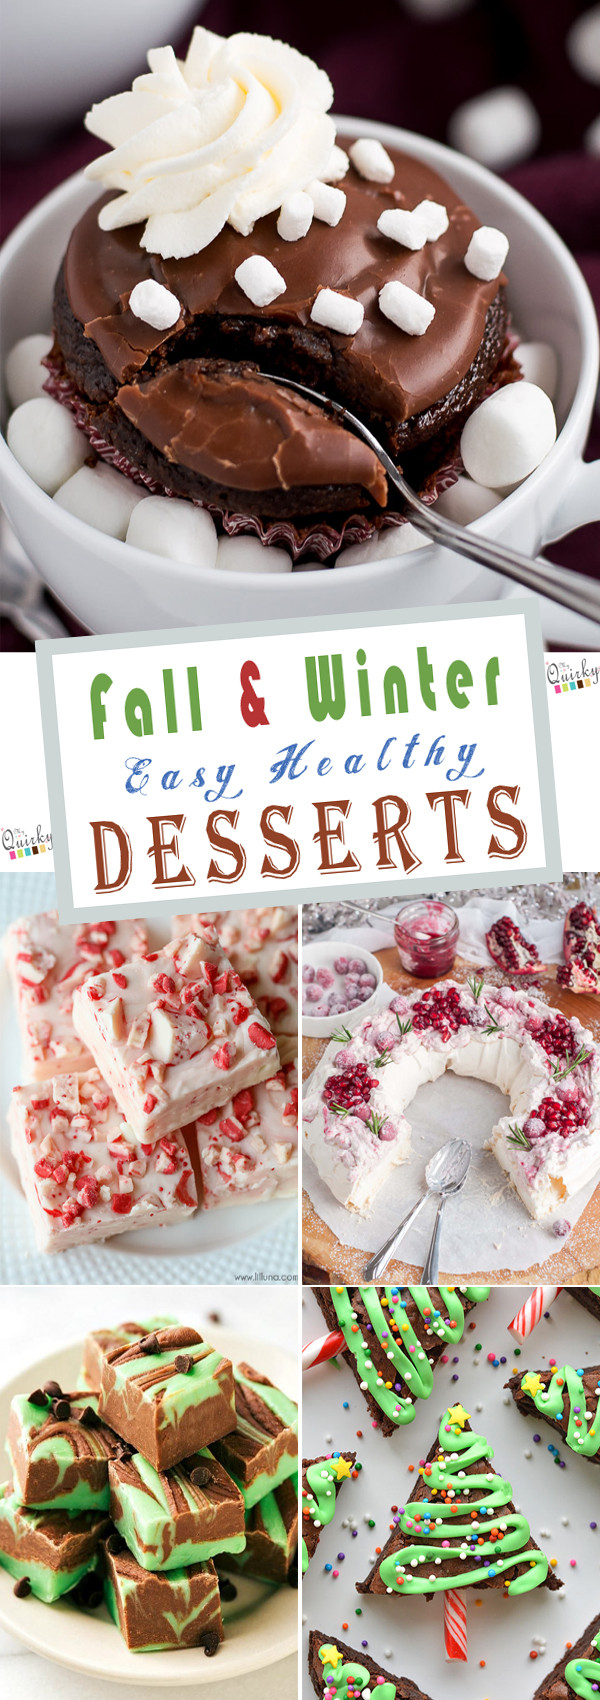 Healthy Desserts Easy To Make
 23 Fall & Winter Easy Healthy Desserts To Make At Home